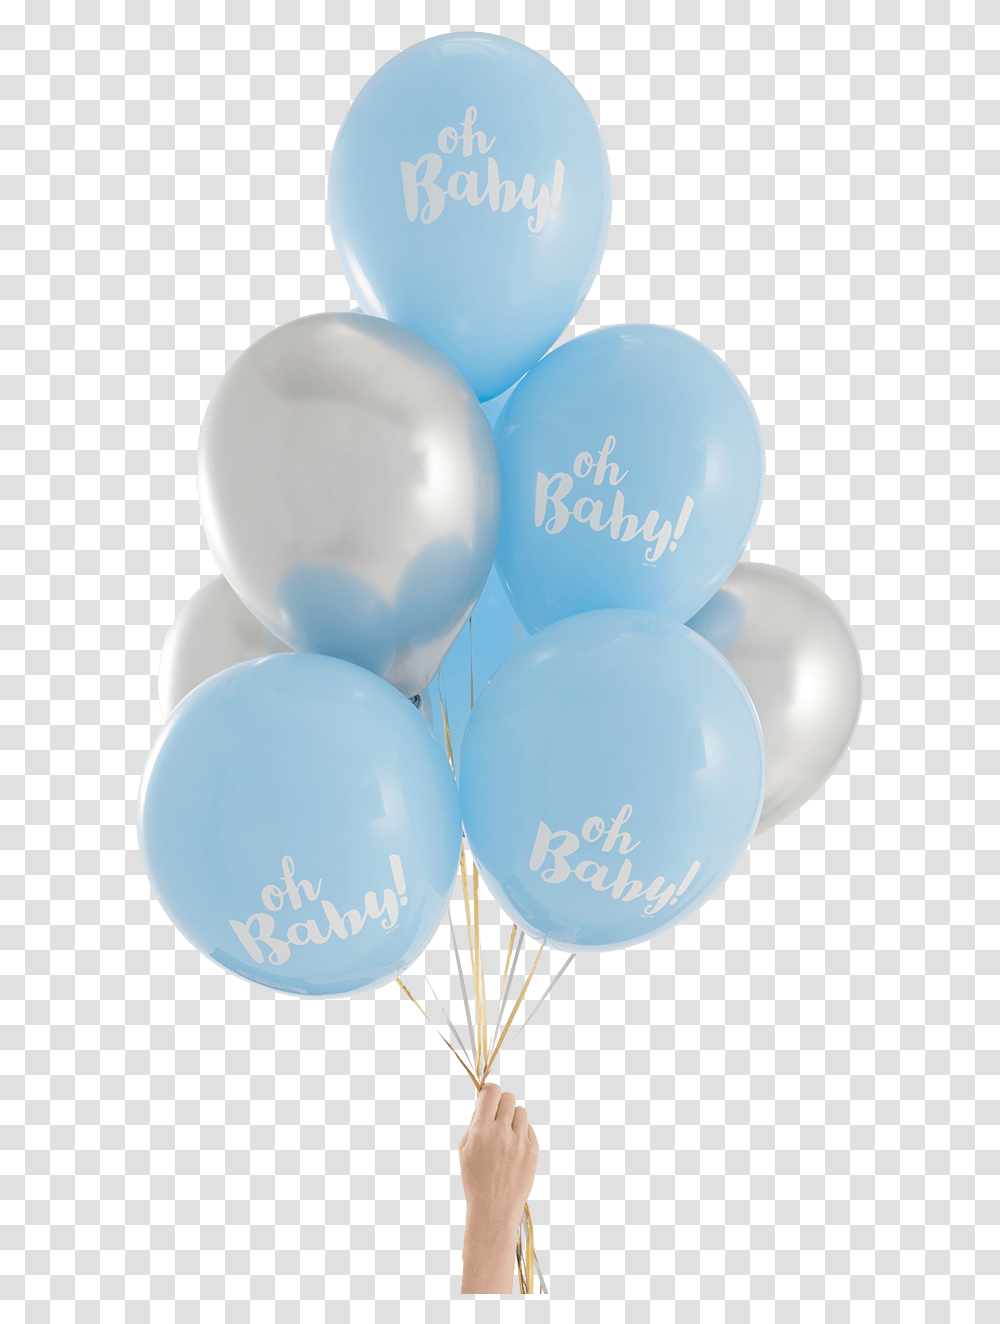 Download Oh Baby Silver Blue Party Light Blue Balloons Transparent Png